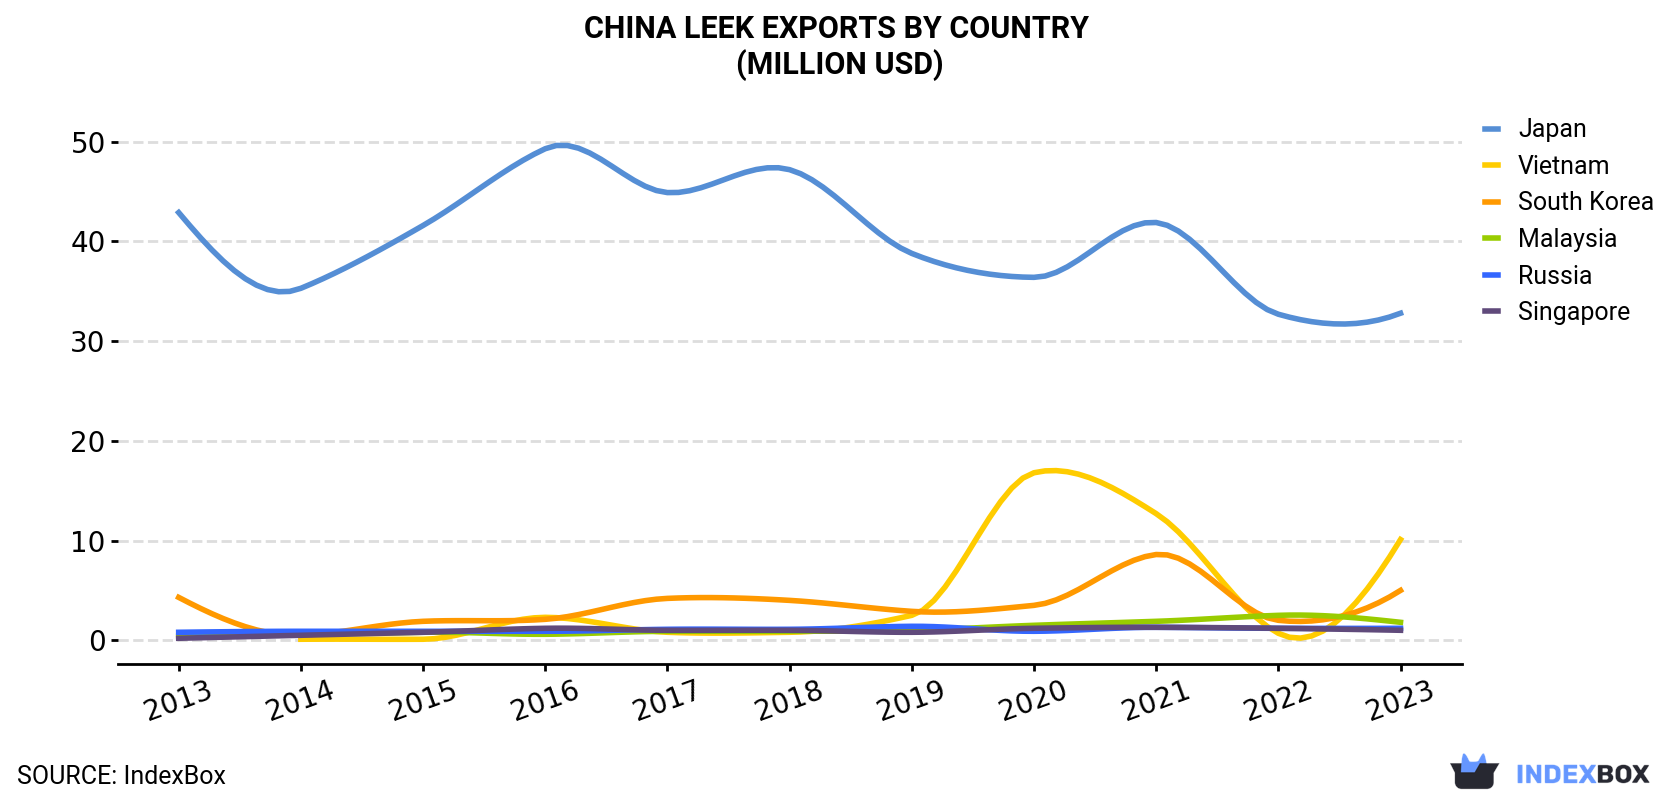 China Leek Exports By Country (Million USD)